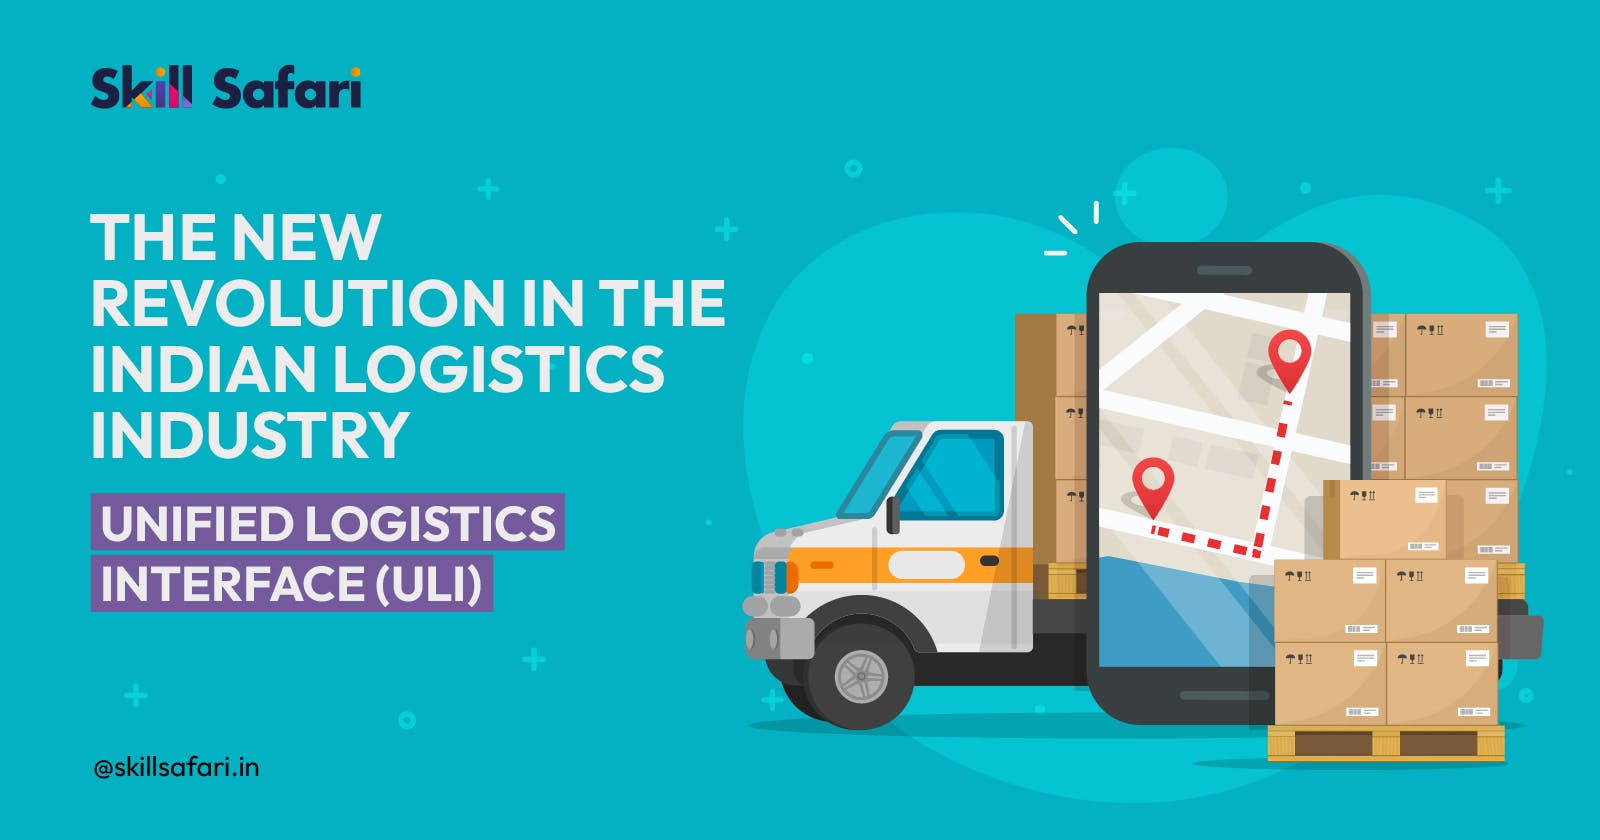 The New Revolution in the Indian Logistics Industry: Unified Logistics Interface (ULI)